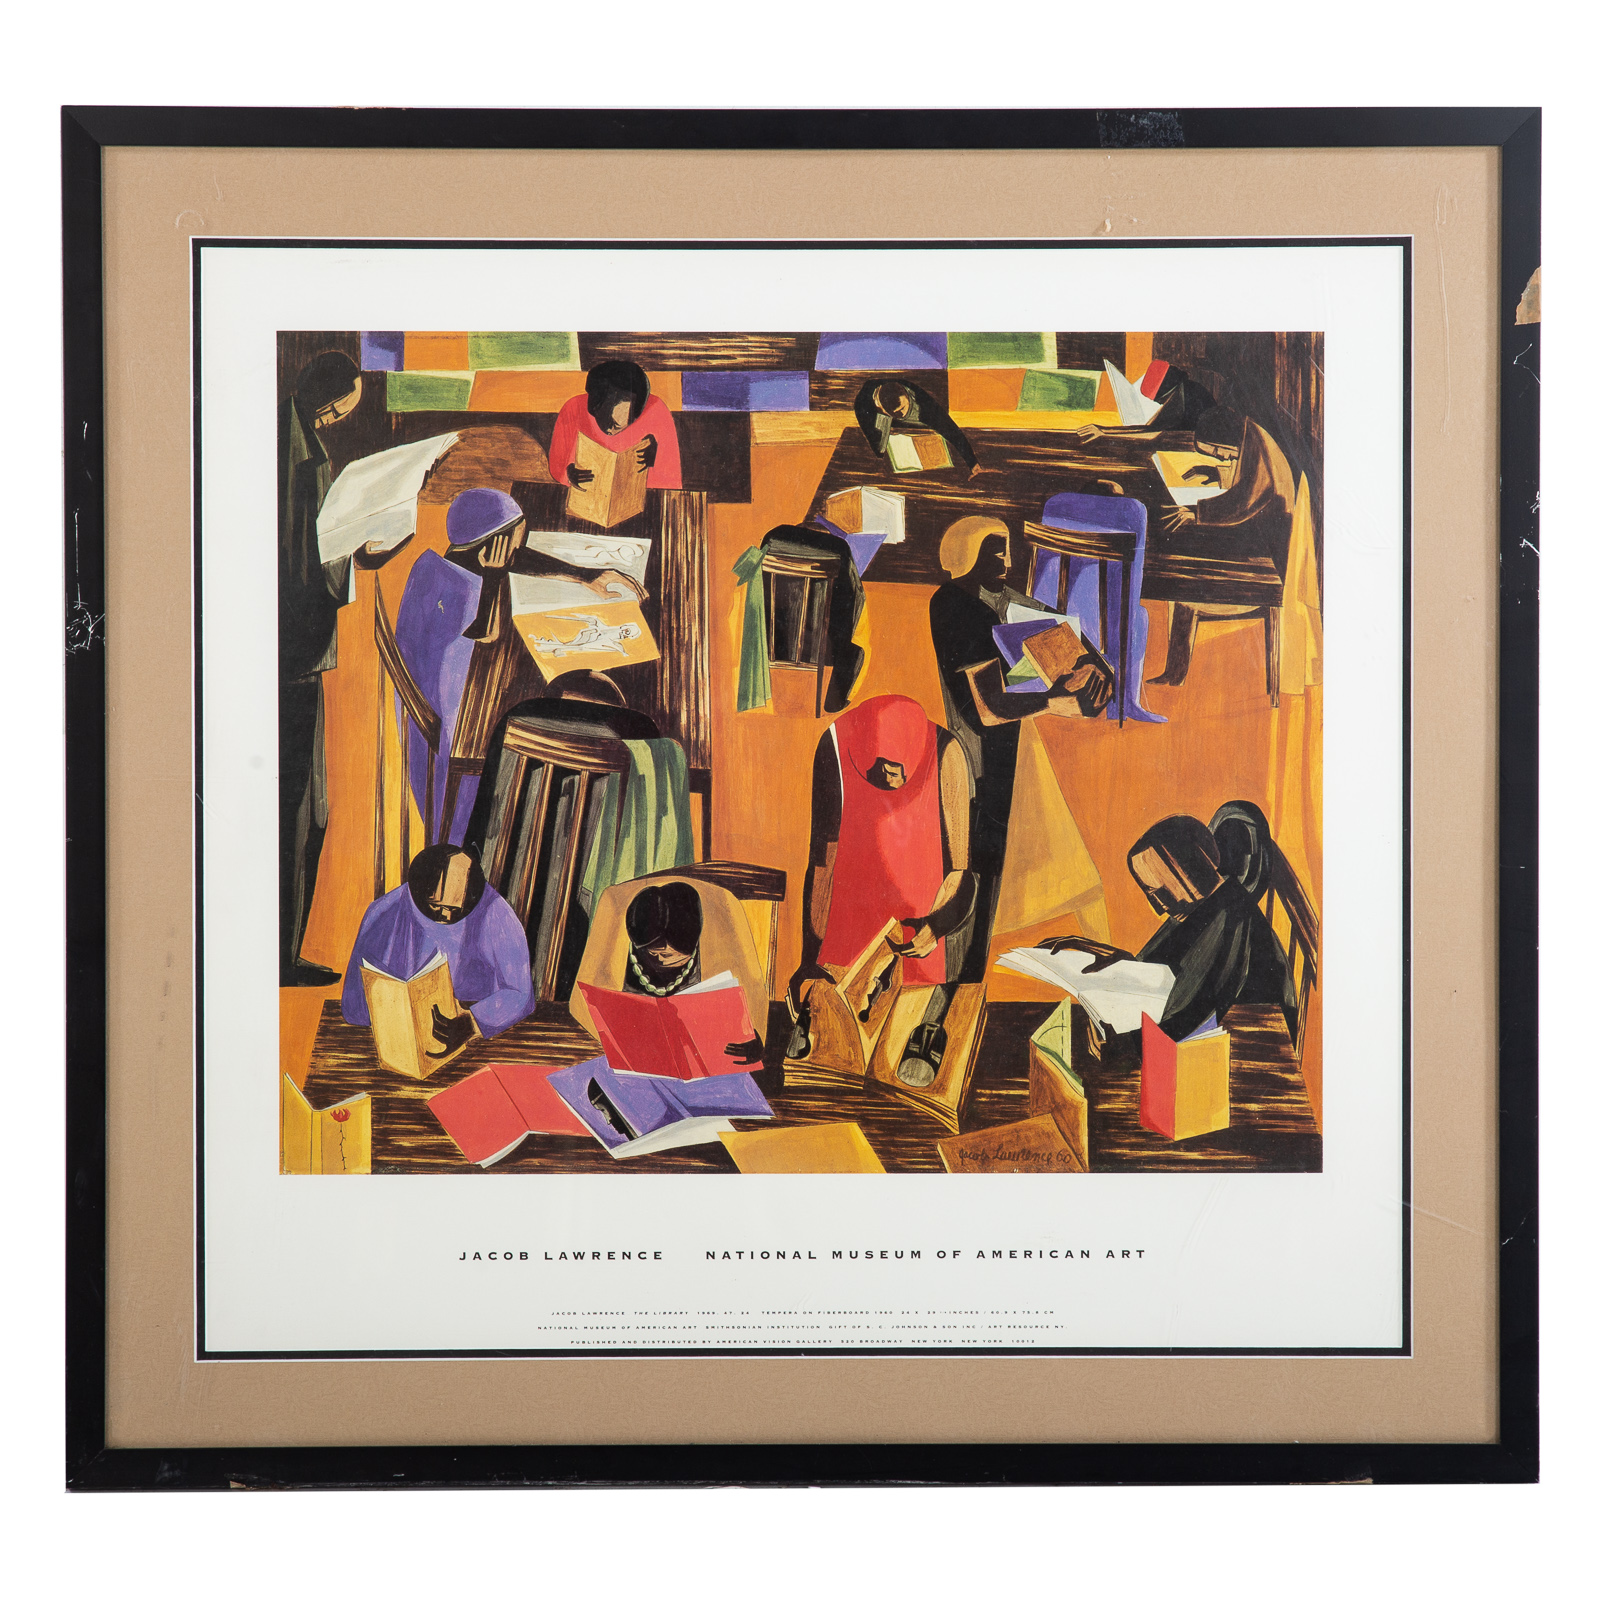 JACOB LAWRENCE. "THE LIBRARY,"